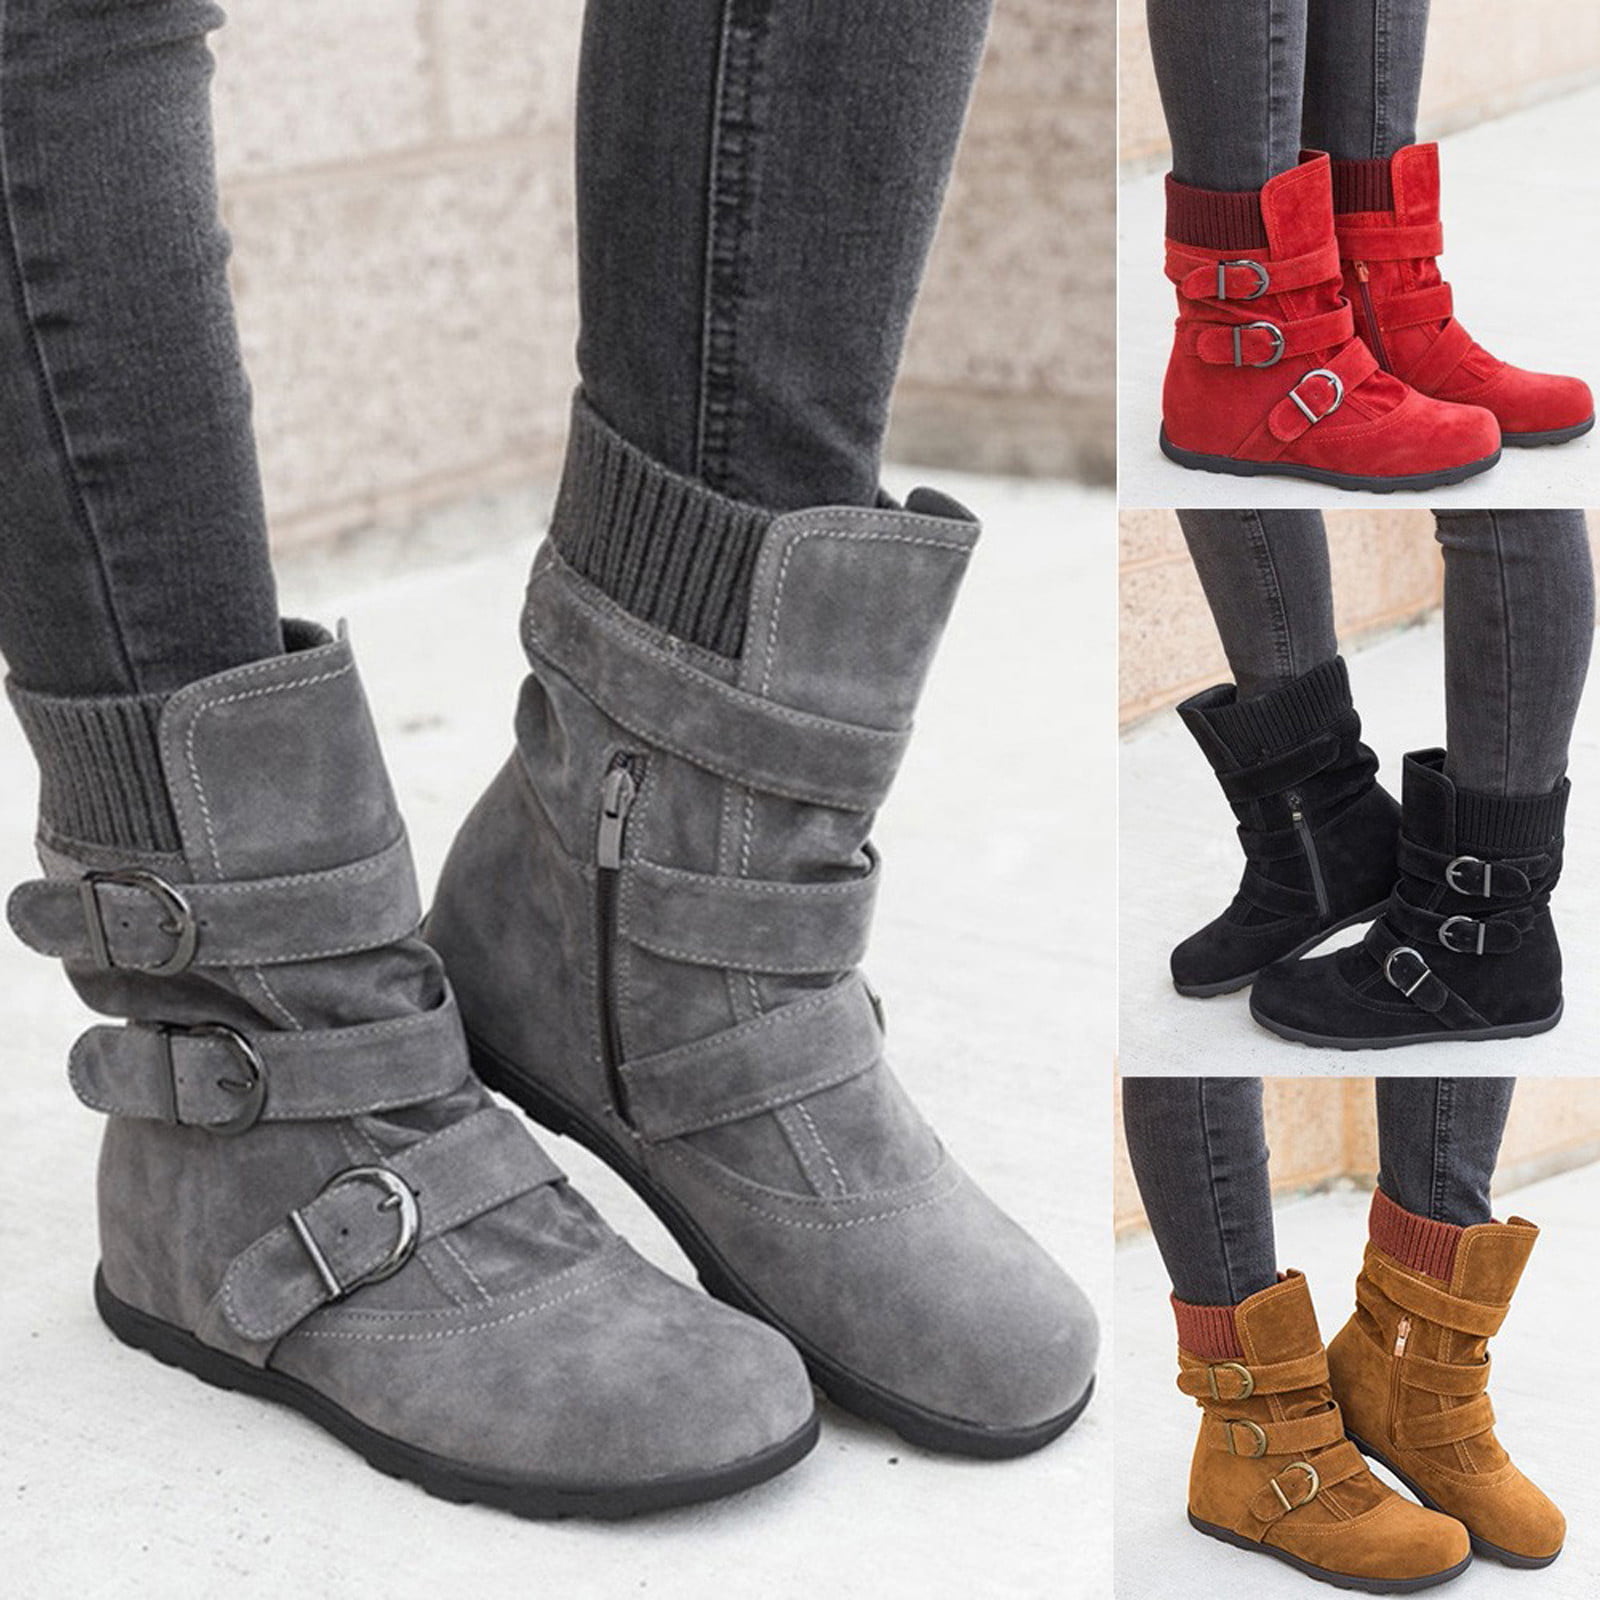 Womens Ankle Boots Ladies Fur Lined Warm Zip Snow Flat Lace Up Booties Shoes